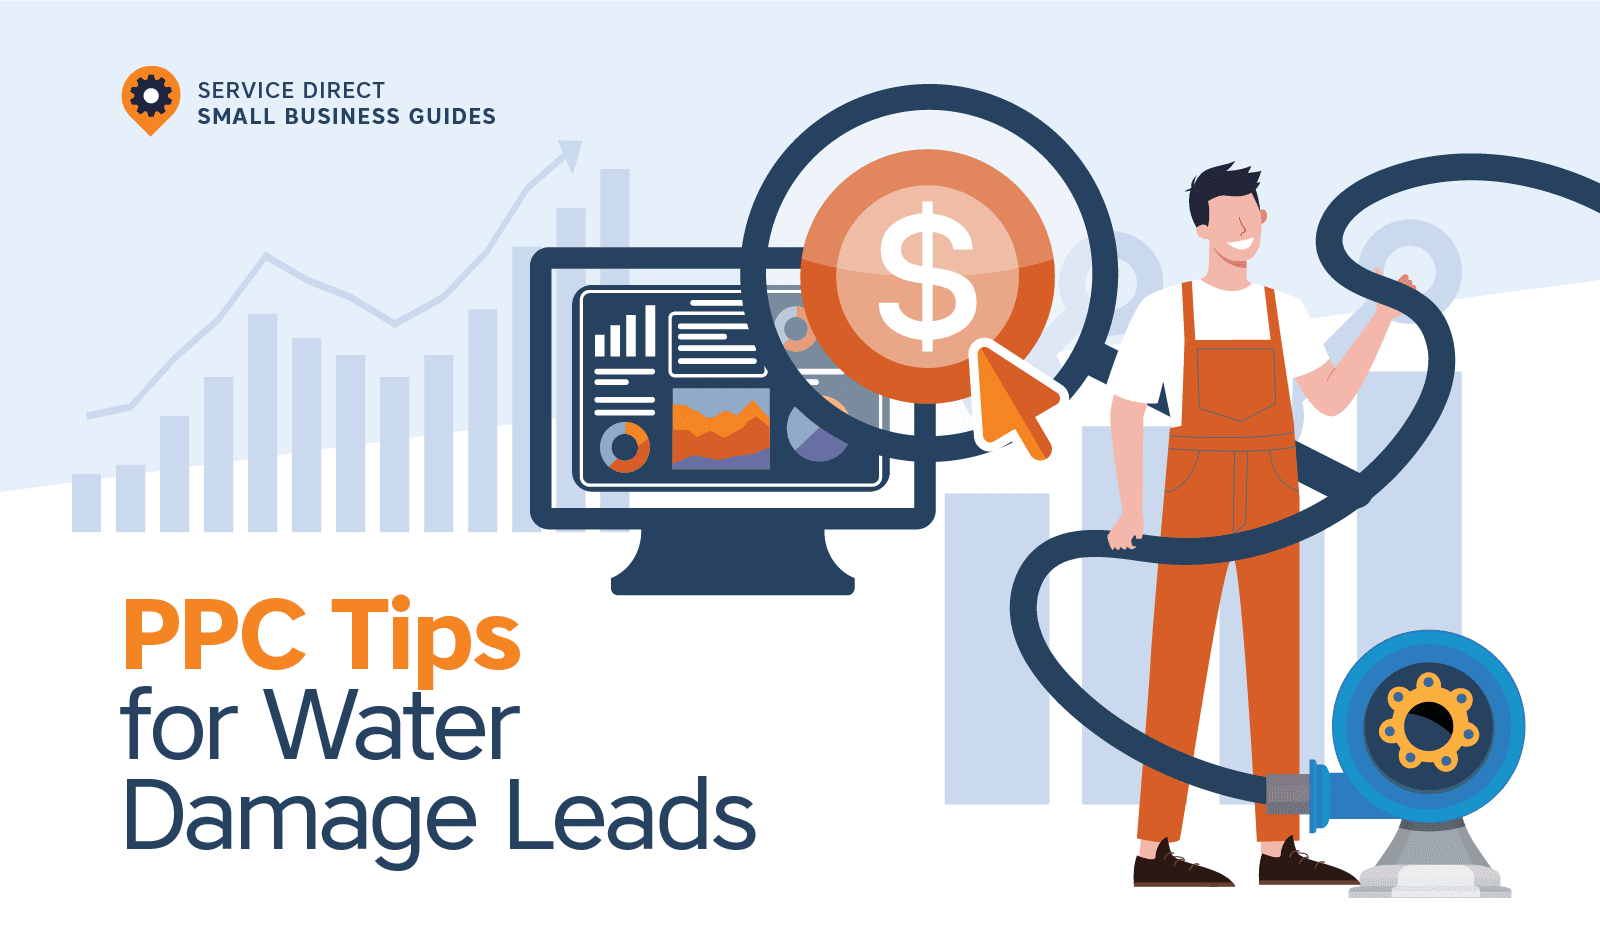 PPC Tips for Water Damage Leads